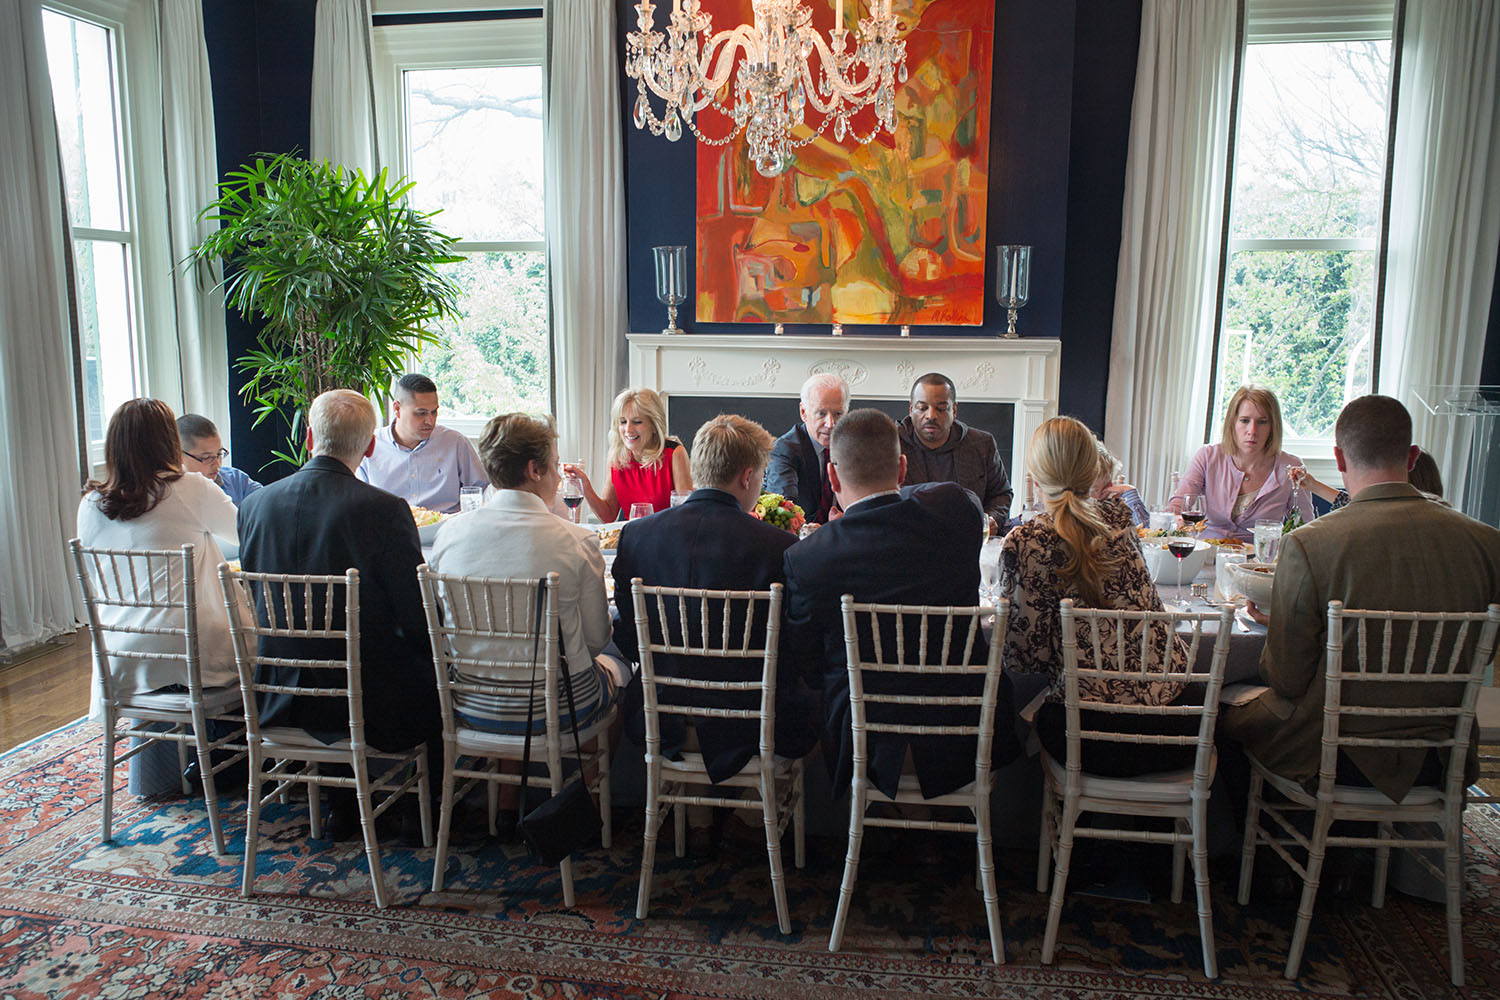 Vice President Joe Biden and Dr. Jill Biden host a dinner for military families to celebrate the Month of the Military Child, at the Naval Observatory Residence, in Washington, D.C., April 15, 2015. Also pictured is LeVar Burton, host of Reading Rainbow. (Official White House Photo by David Lienemann)